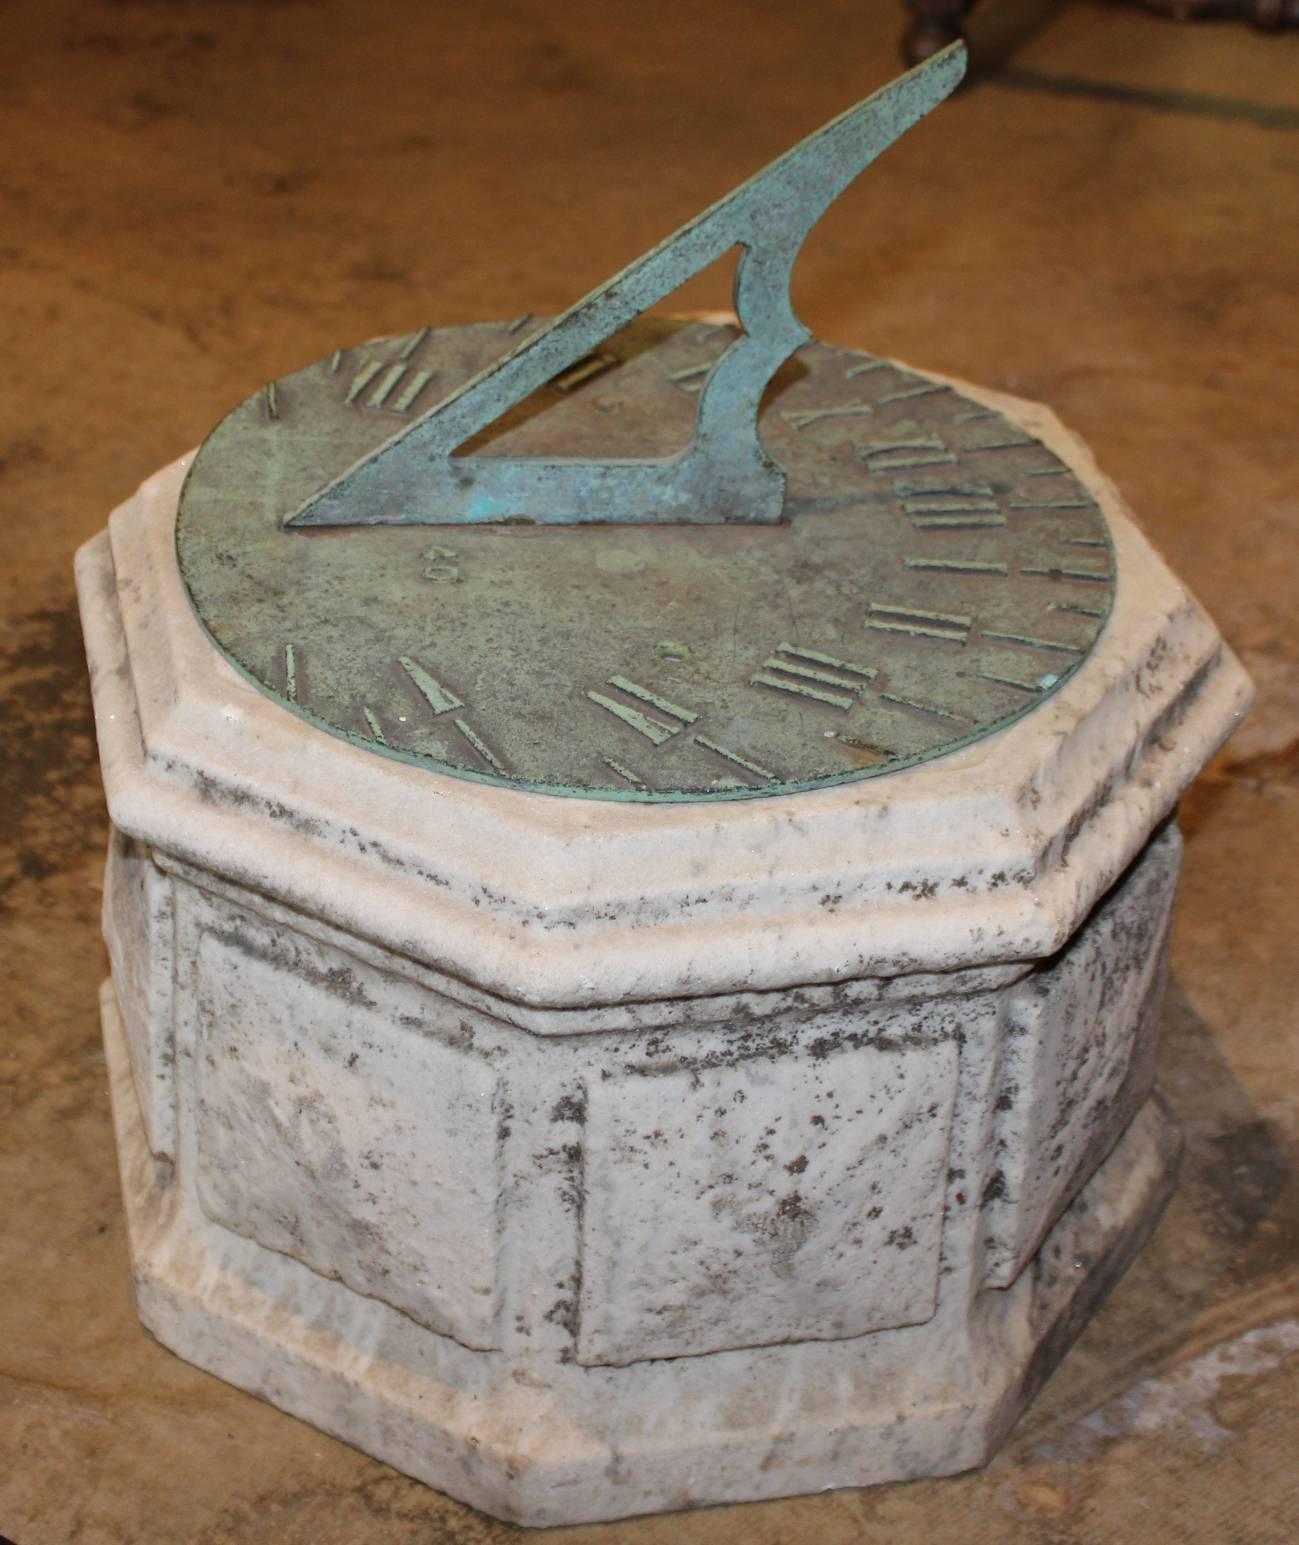 A nice bronze sundial with Roman numerals, with great verdigris, marked LAT 40, with an octagonal marble base with worn side panels and overall great patina. Probably dates to the late 19th or early 20th century, with an earlier plinth base, and is